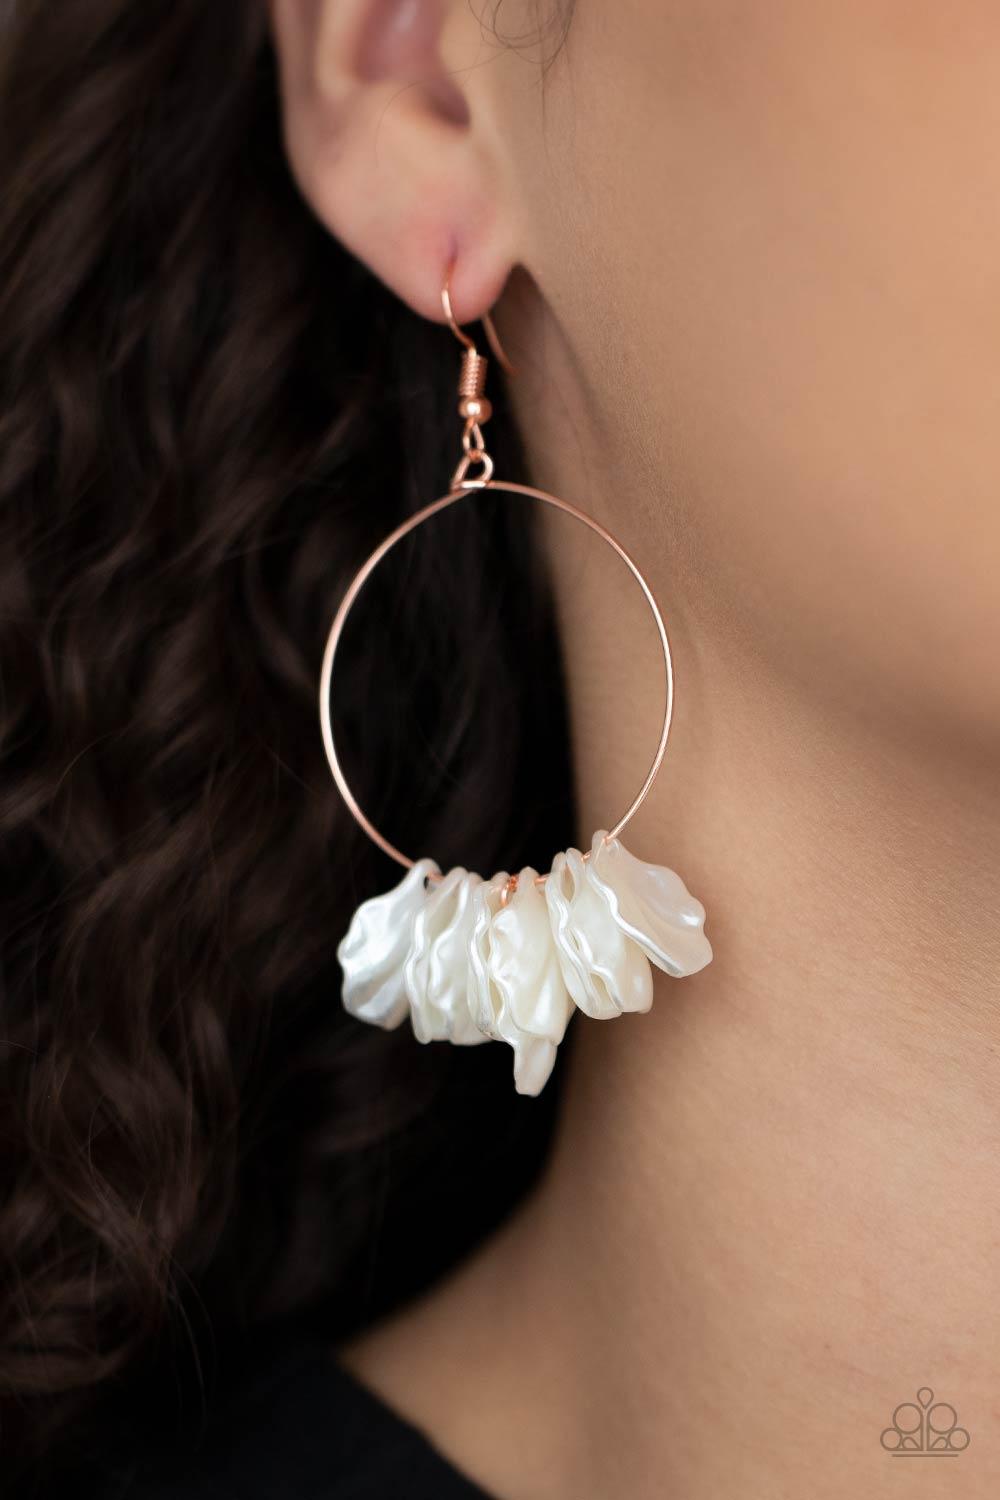 Paparazzi Accessories Sailboats and Seashells - Copper Pearly shell-like beads are threaded along a dainty shiny copper wire, creating a flirtatious beach inspired fringe. Earring attaches to a standard fishhook fitting. Sold as one pair of earrings. Jewe